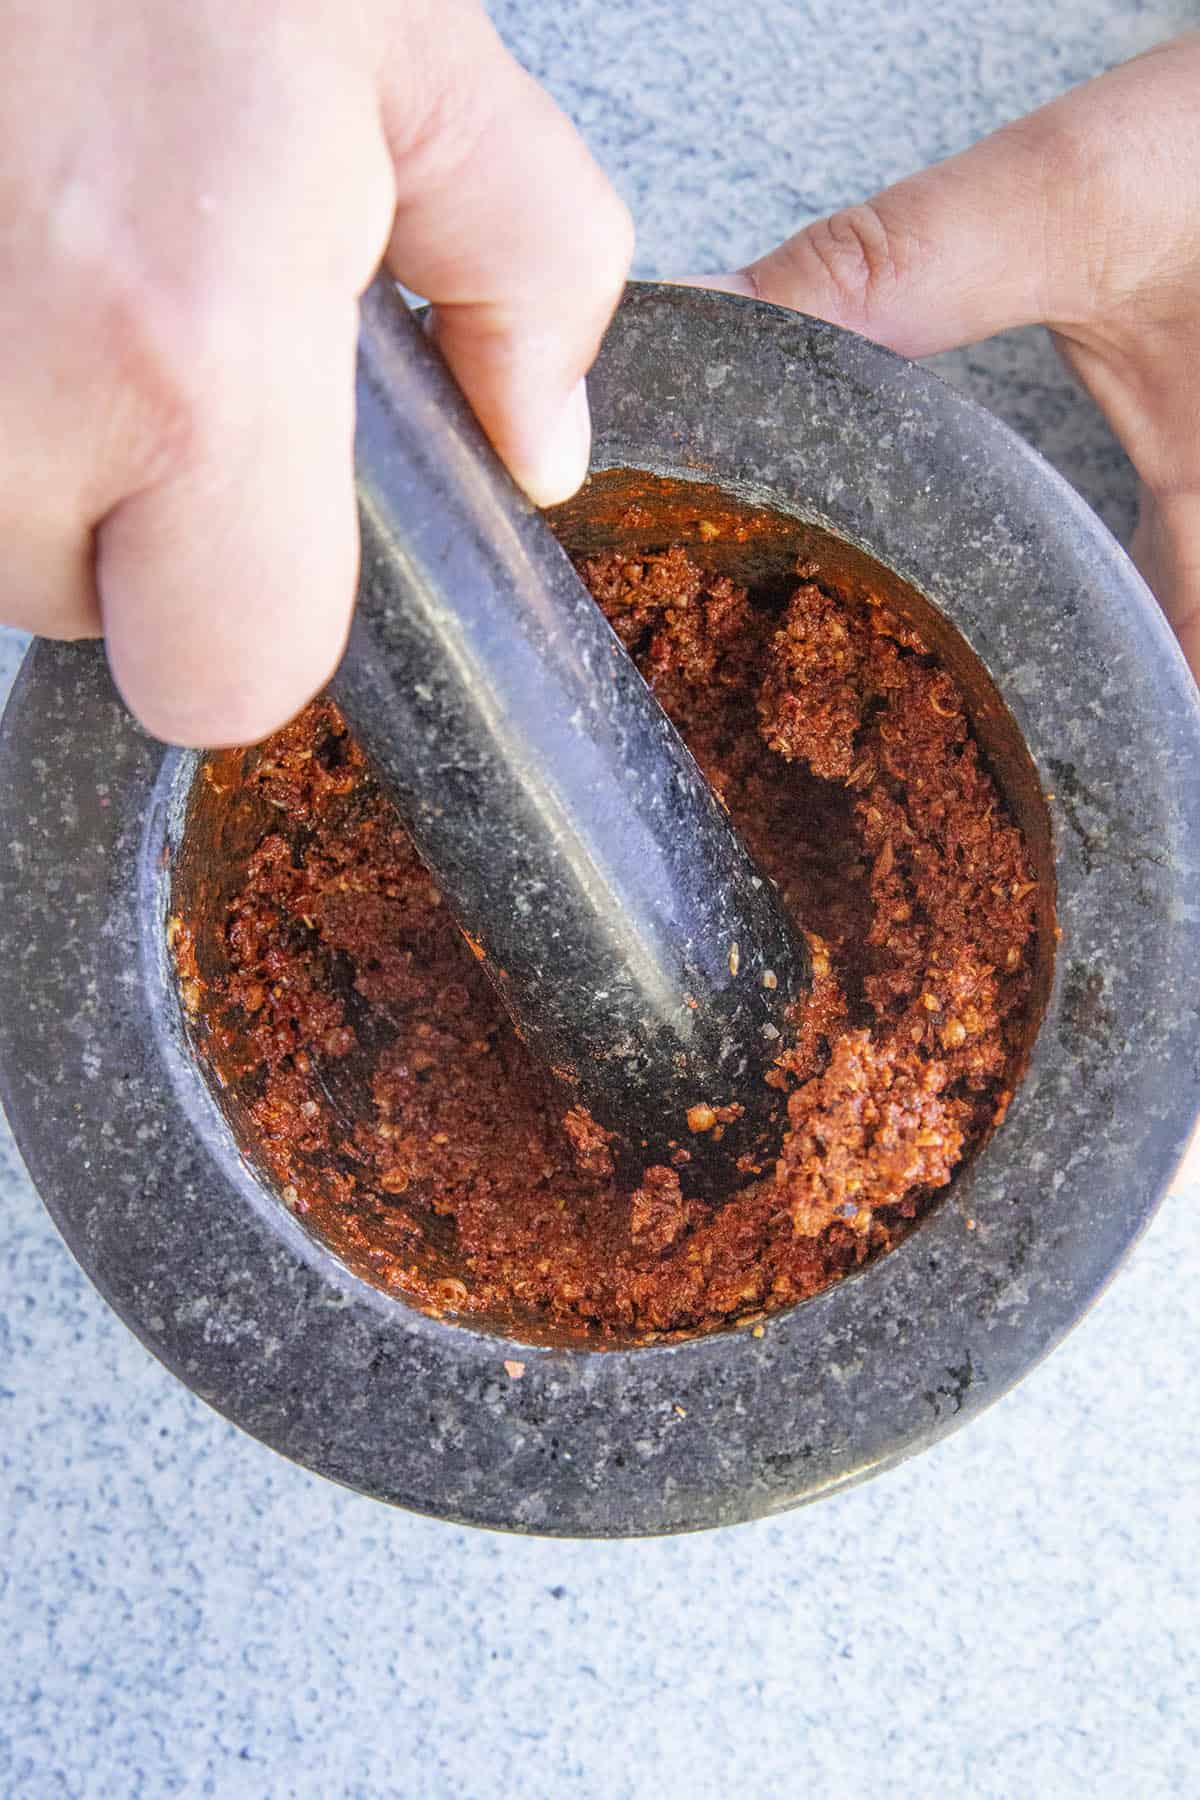 Mike grinding Achiote Paste in a mortar